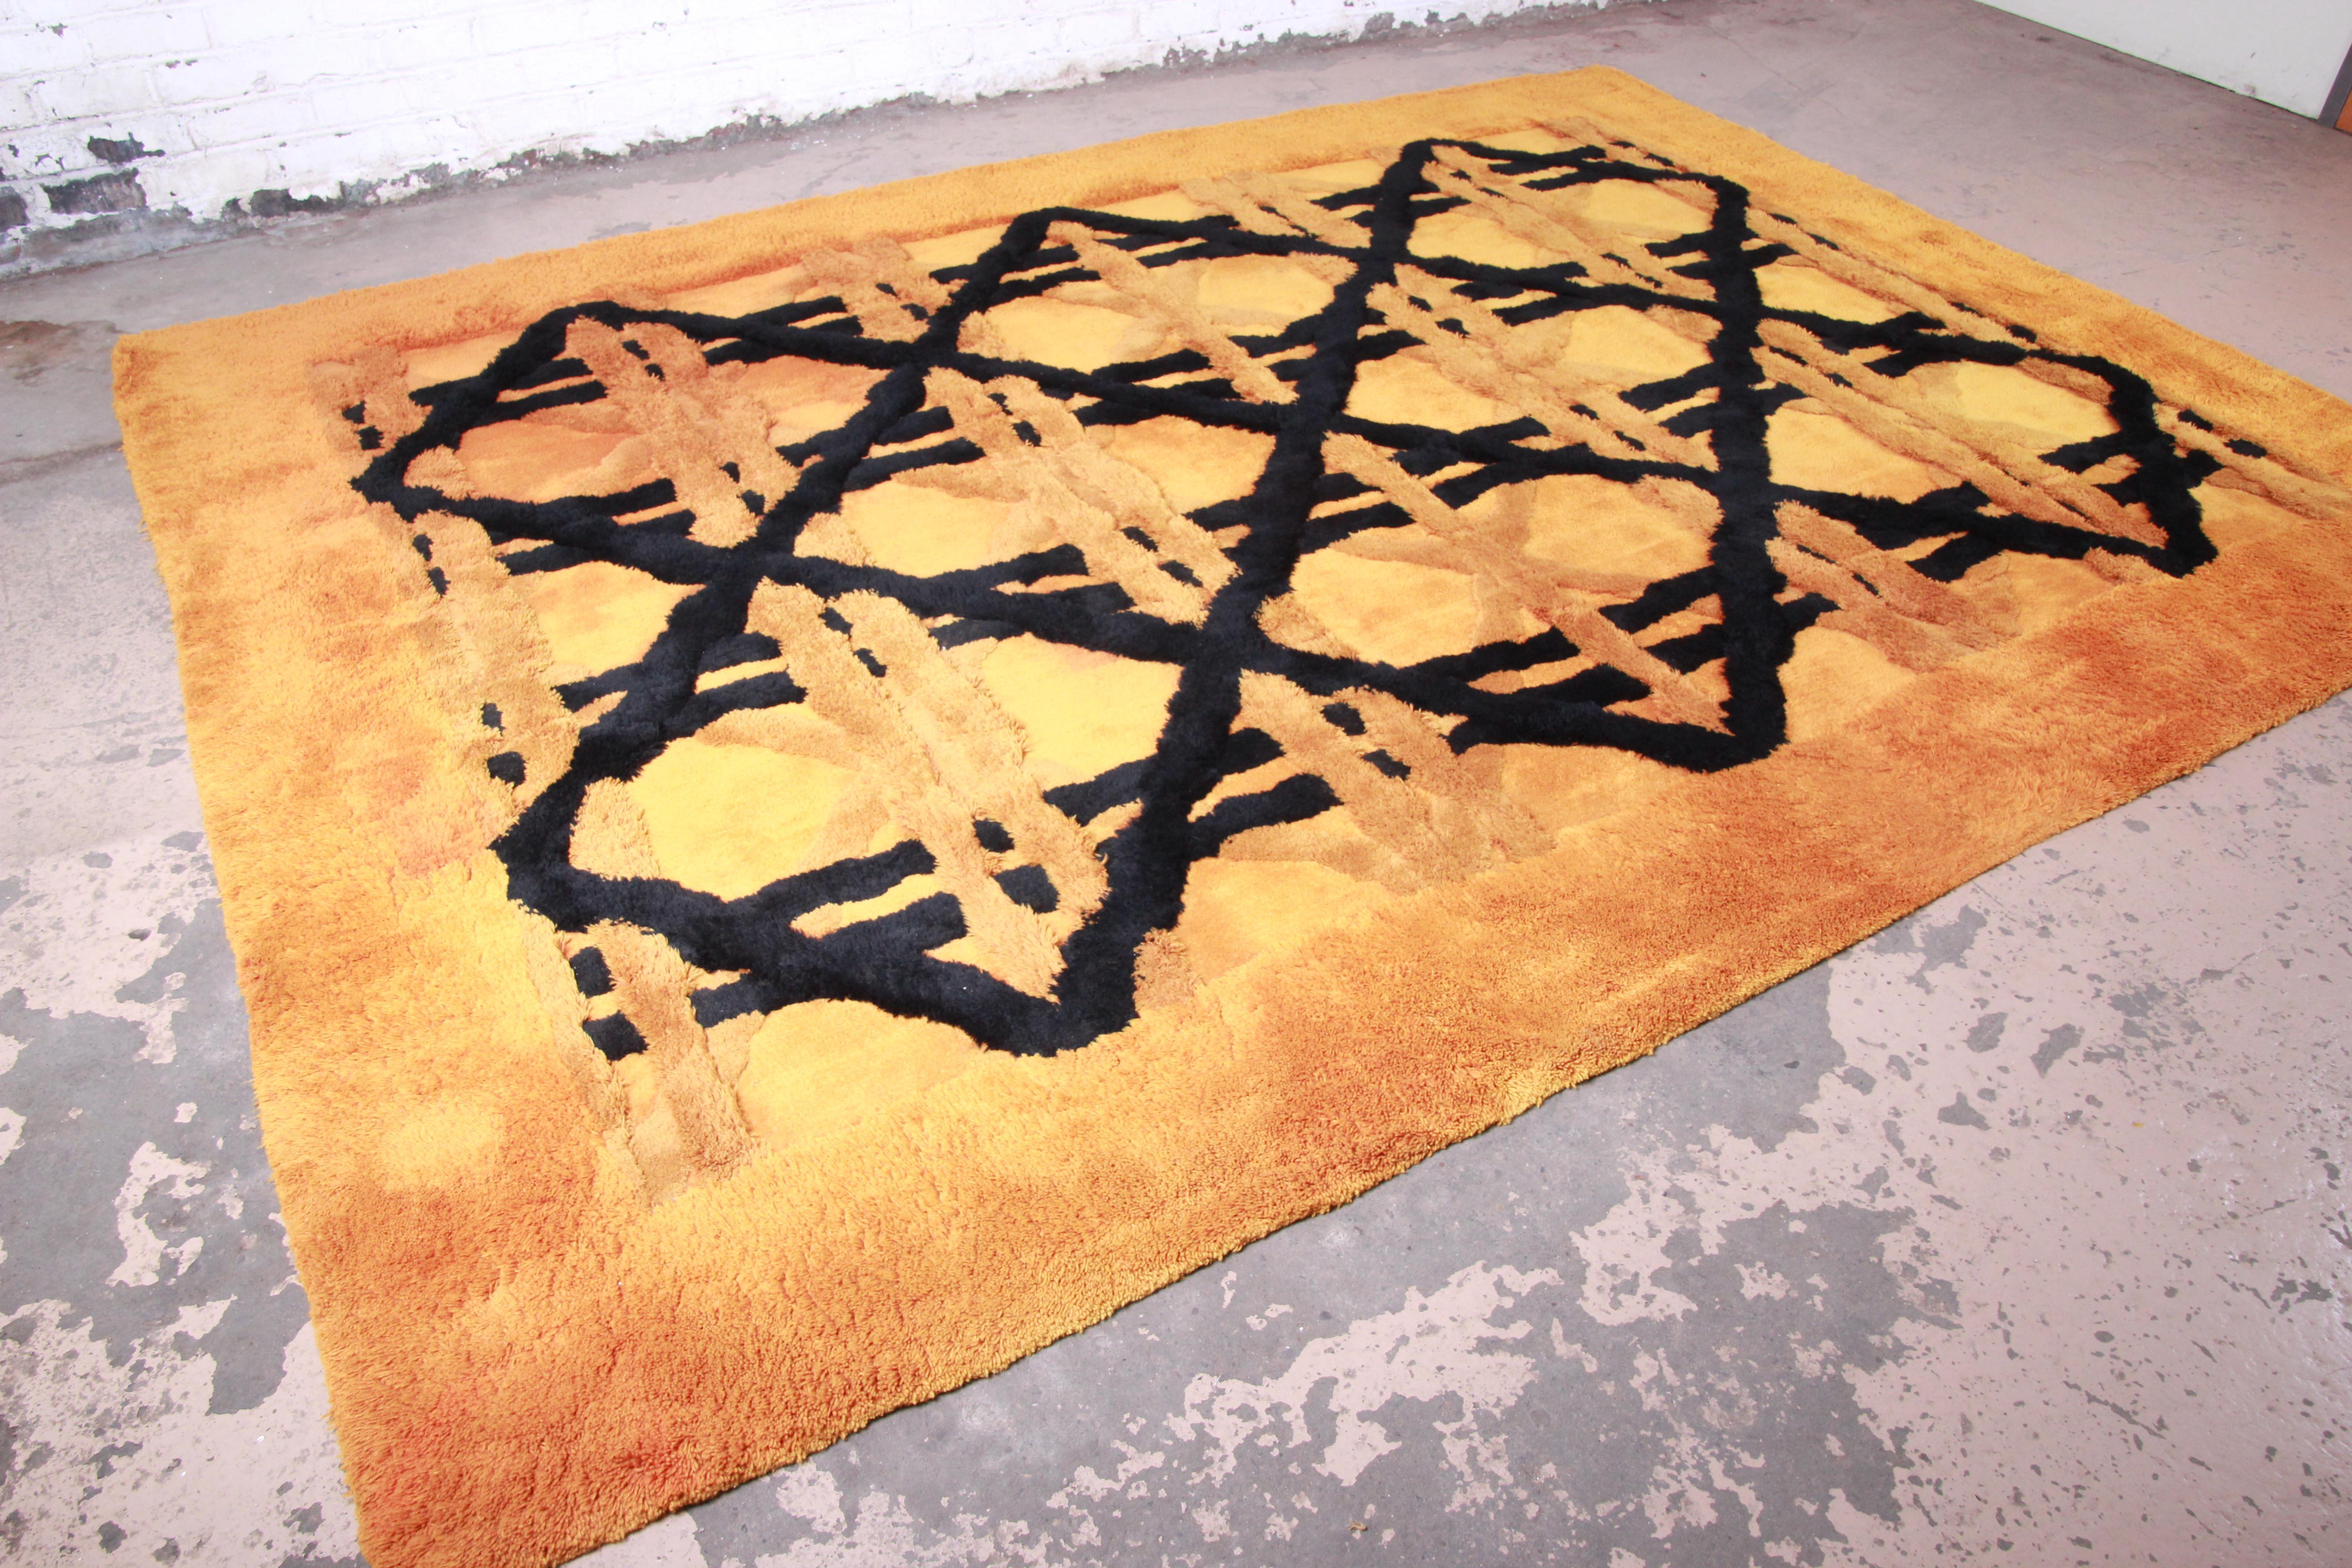 A unique and exceptional sculpted shag rug made by Edward Fields in 1974. The rug has a very thick and plush wool pile, with an orange field and black geometric design. The original label is present. Perfect for any modern or mid-century modern